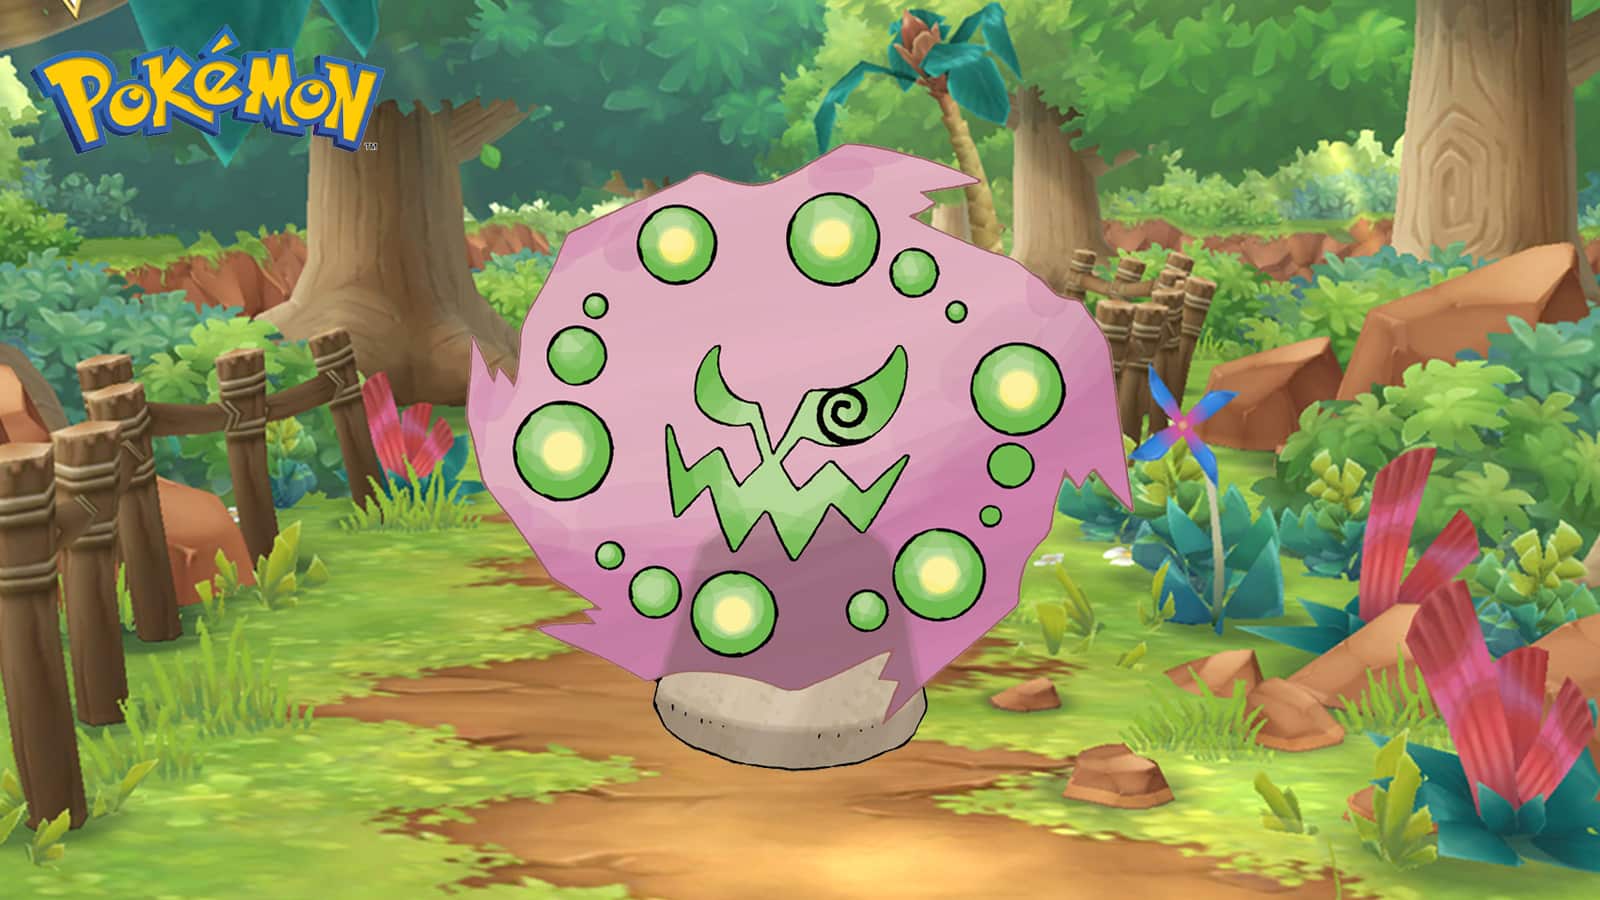 Spiritomb appearing in Pokemon with its weaknesses